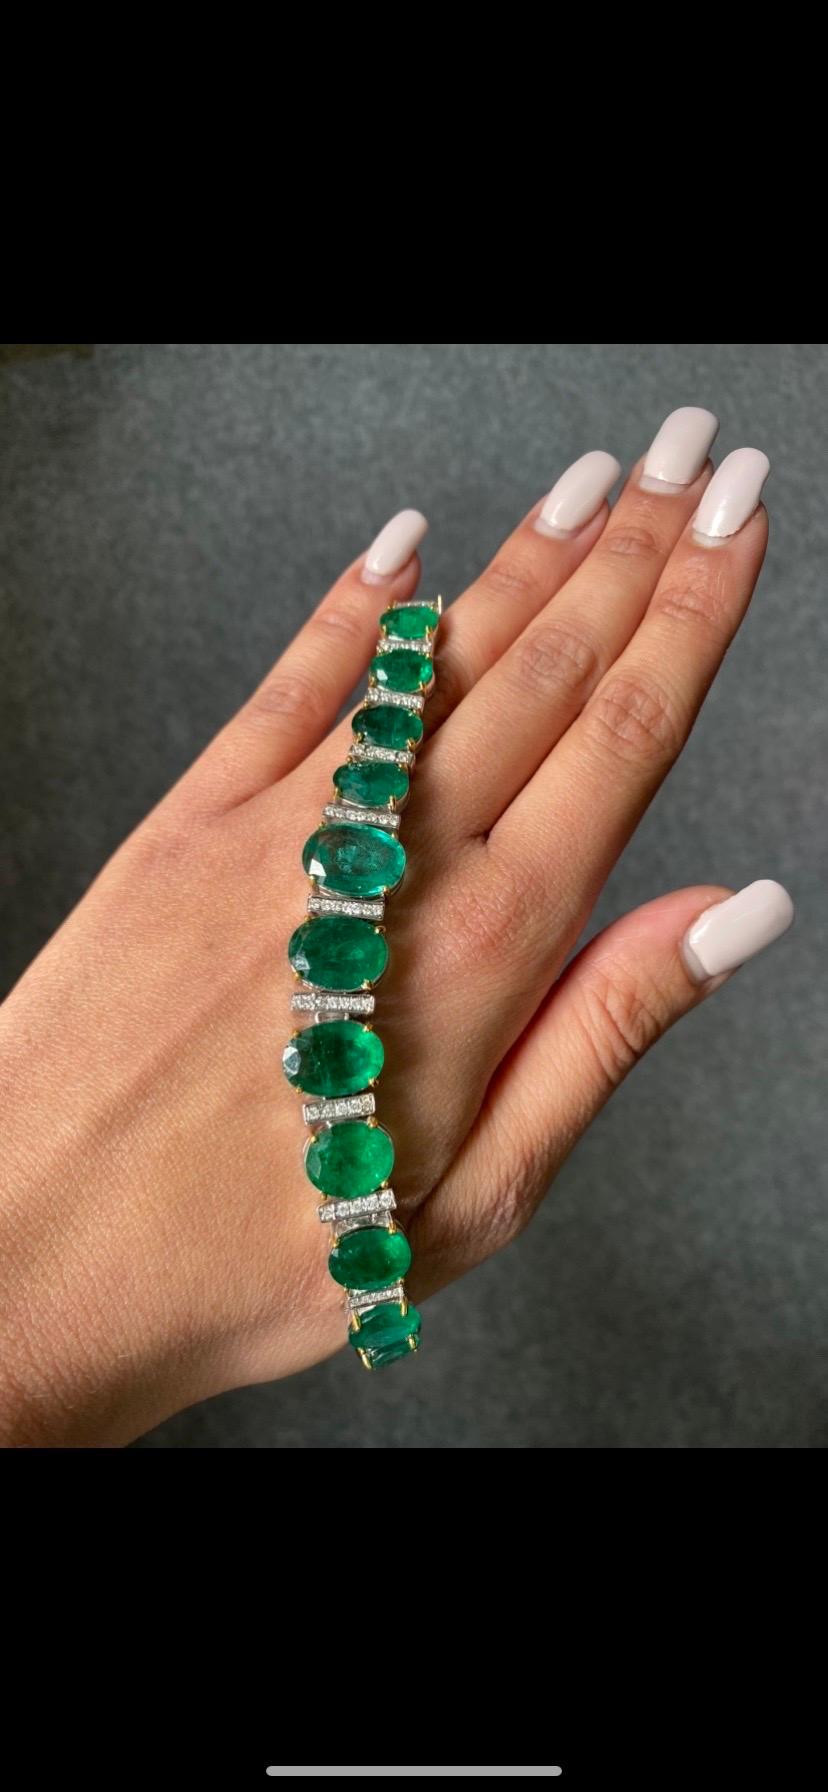 A statement 42 carat, oval shaped Zambian Emerald and Diamond Bracelet set in solid 18K White Gold. All natural Emeralds, with a great vivid green color - and great luster.
The bracelet is currently 6.5 inches long, can be resized. 
Please message